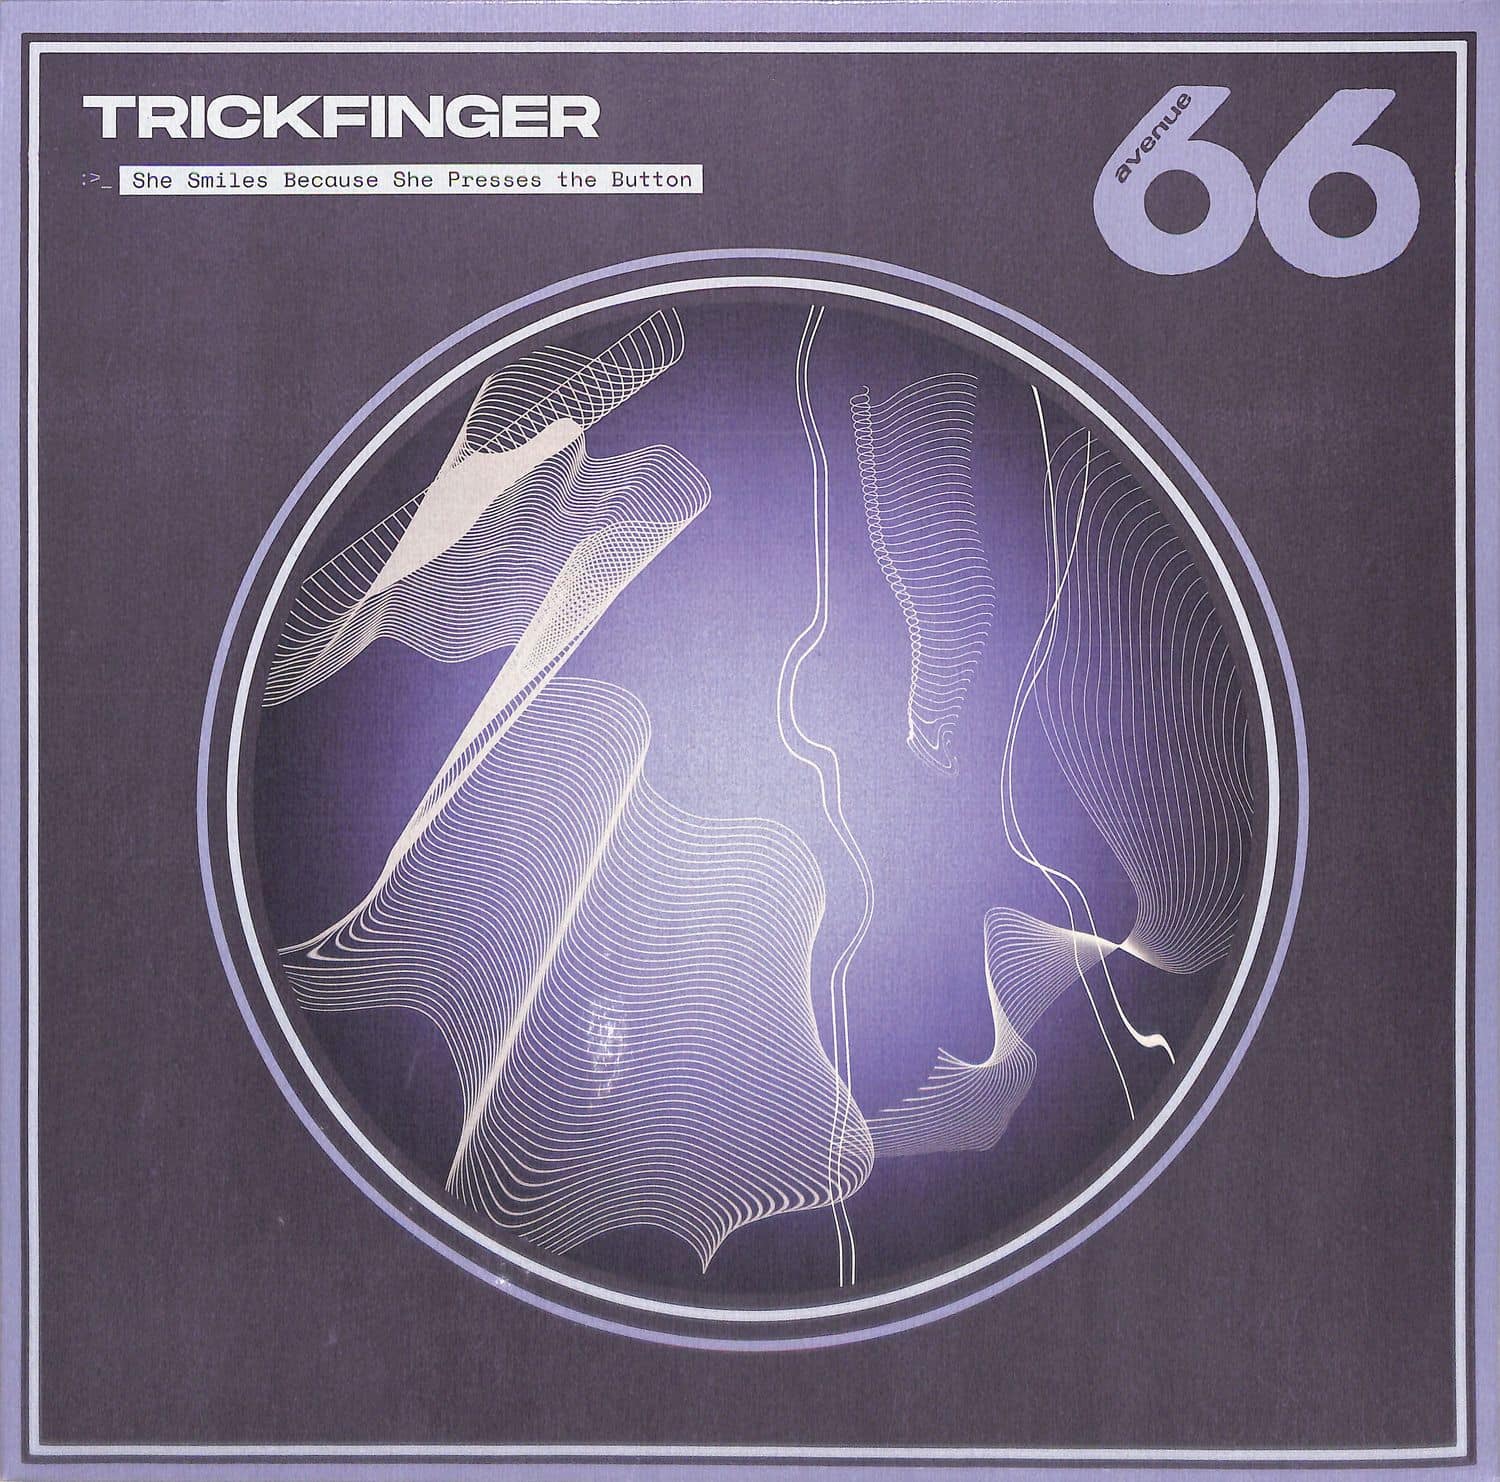 Trickfinger - SHE SMILES BECAUSE SHE PRESSES THE BUTTON 